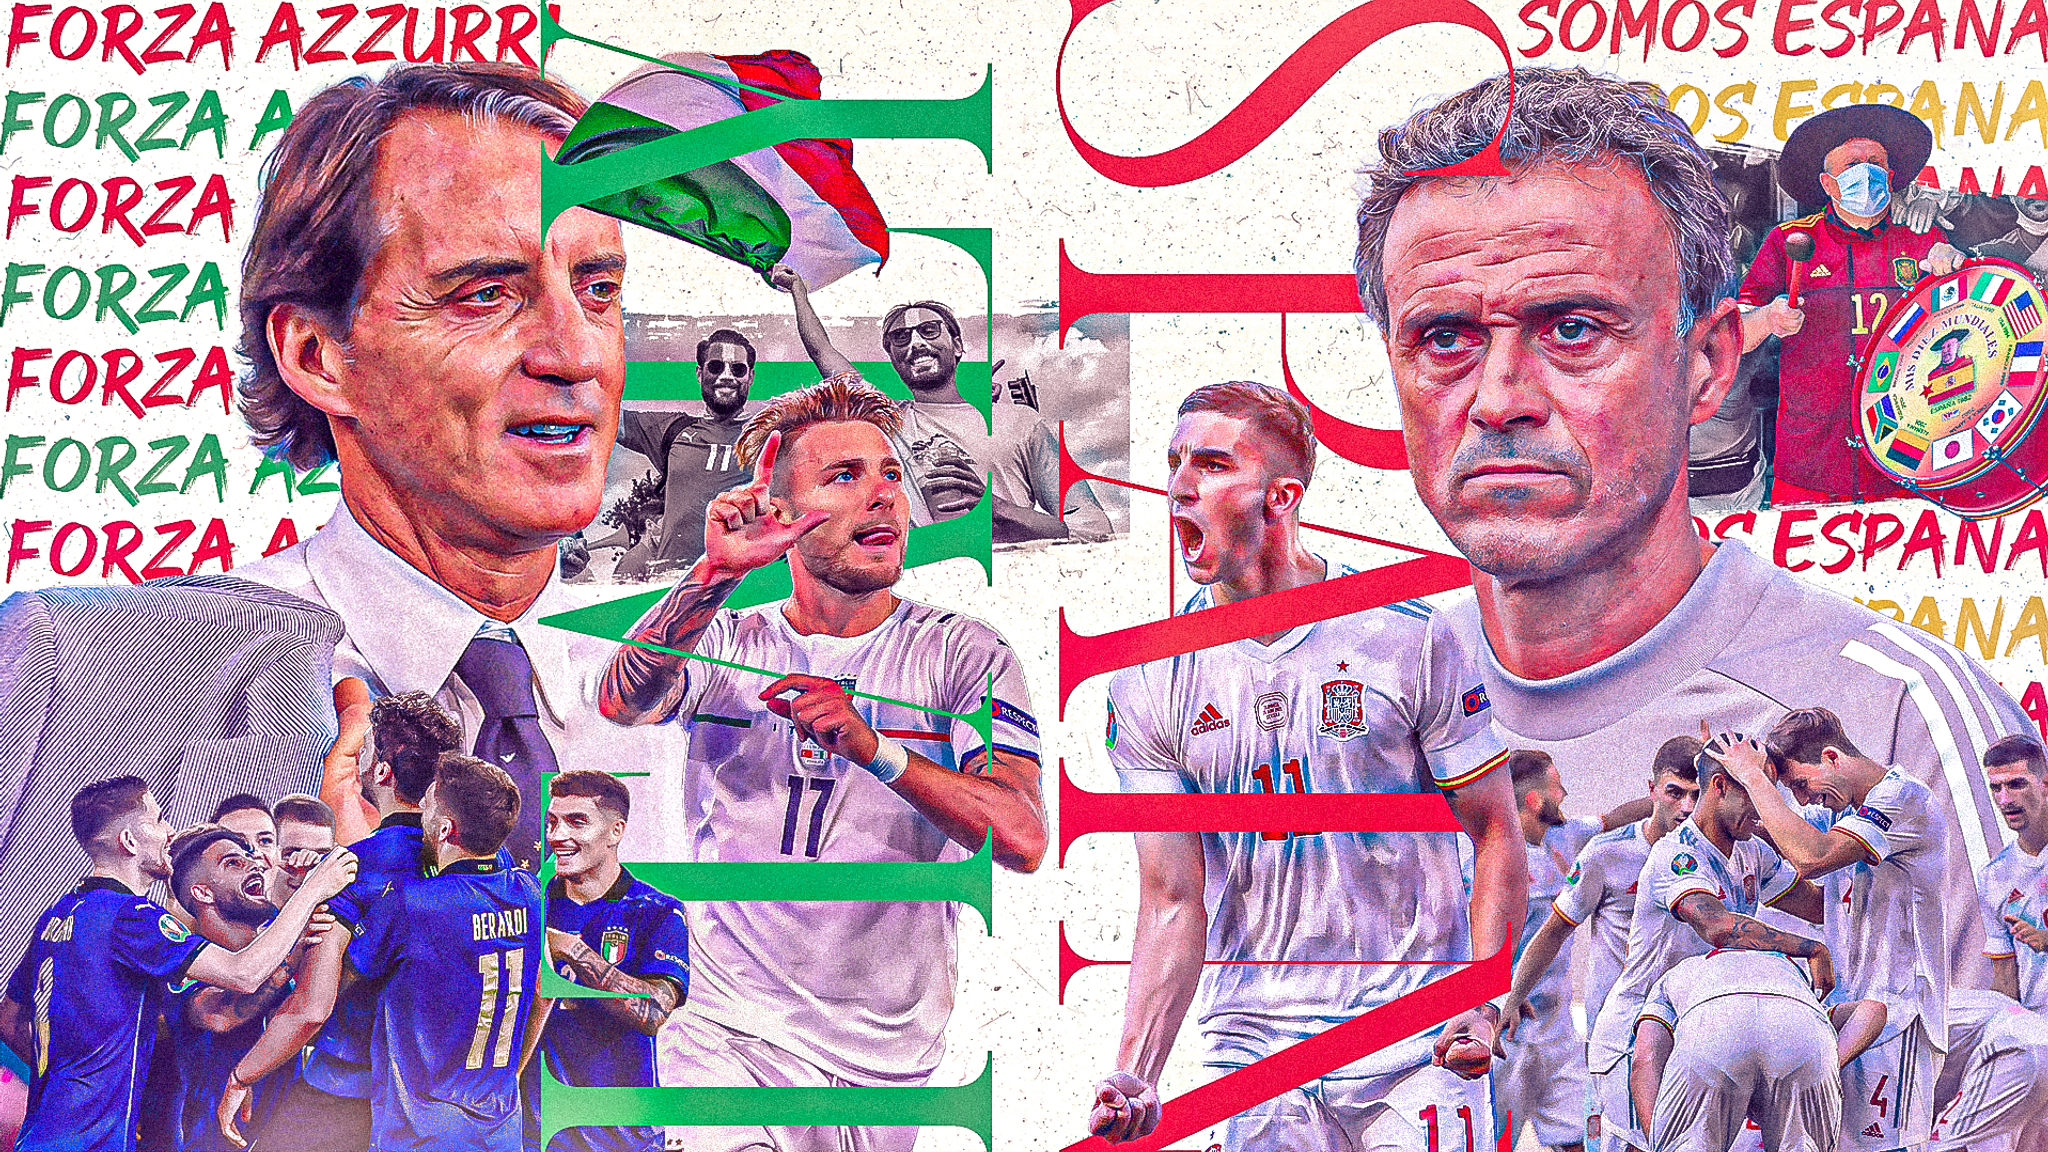 Live match preview - Italy vs Spain 06.07.2021